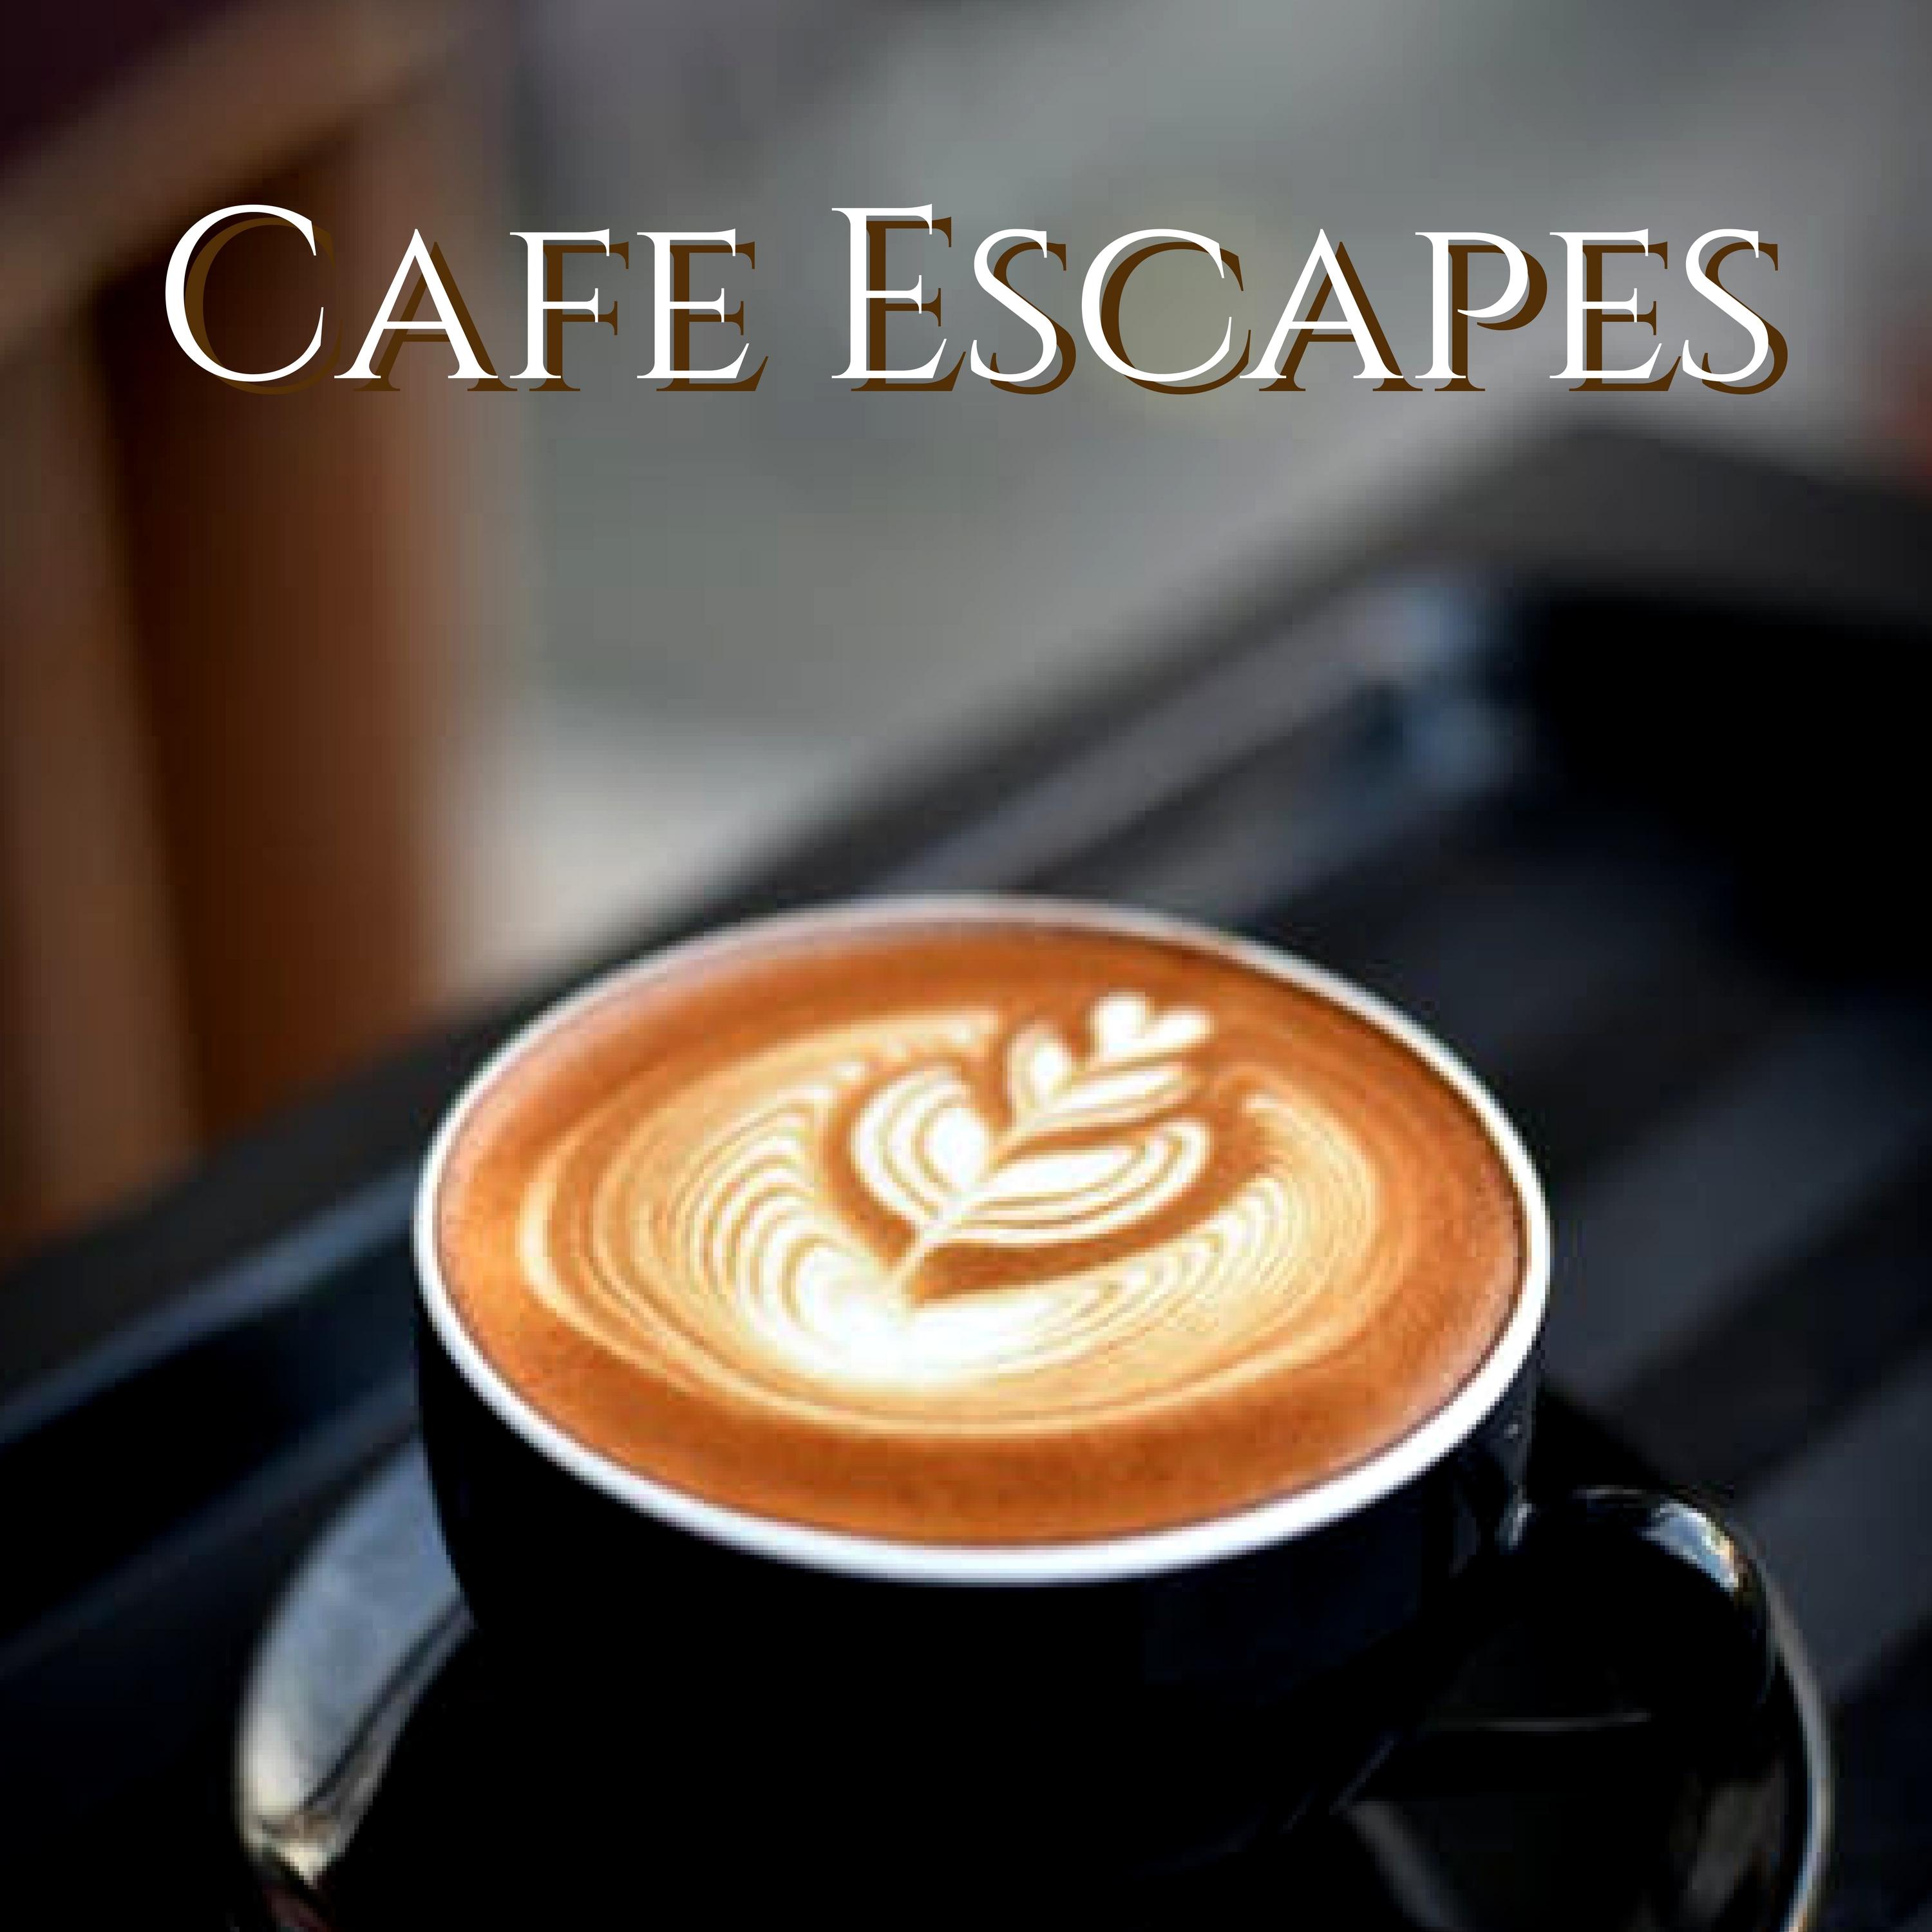 Cafe Escapes - Best Smooth Chillout Background for Lounge Cafe and Bar